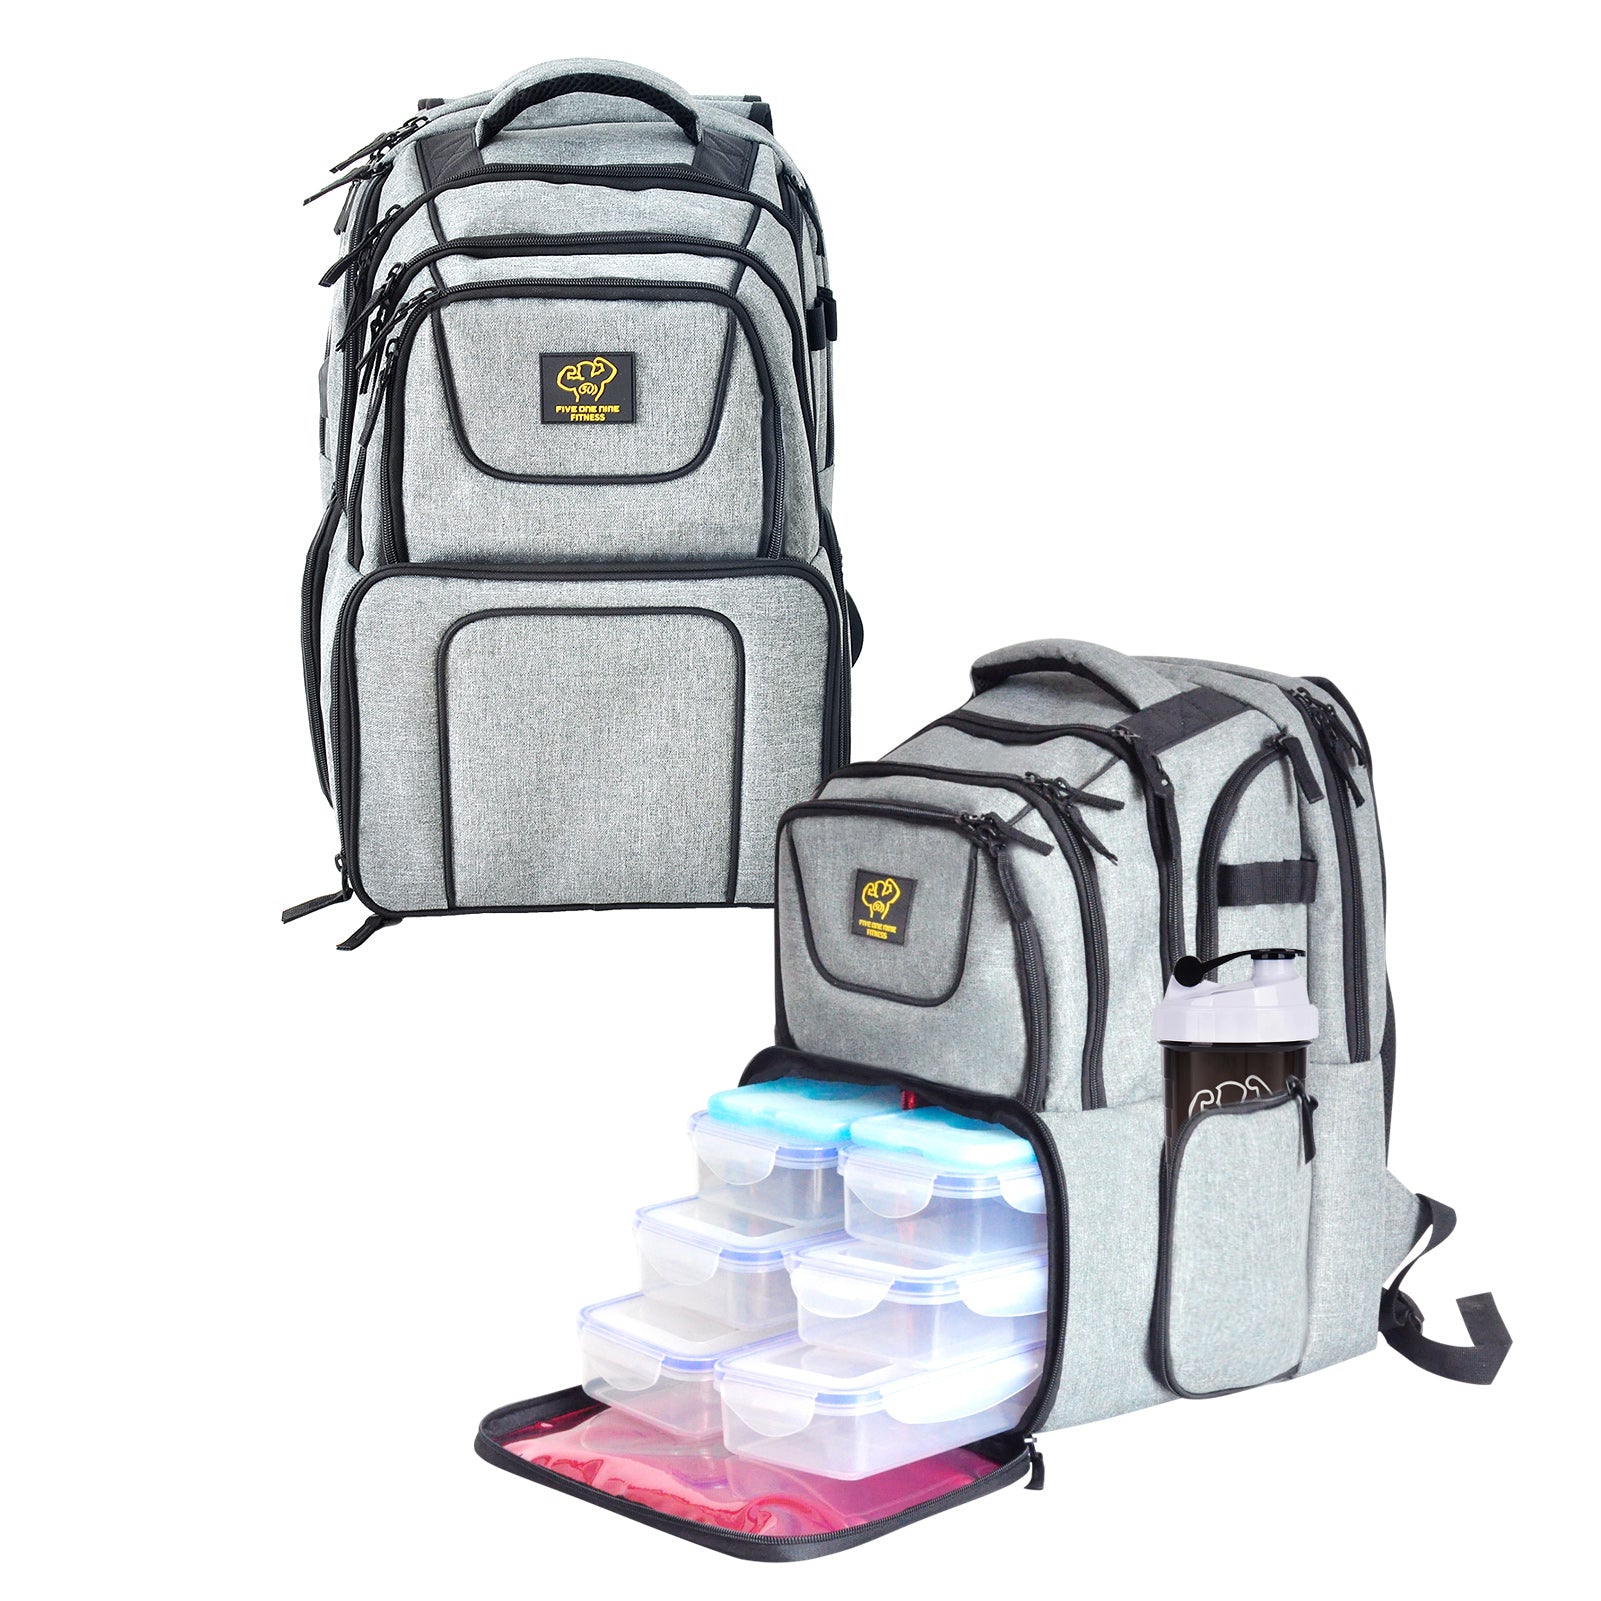 519 FITNESS CLASSIC LARGE BACKPACK MEAL PREP MANAGEMENT SYSTEM – 6